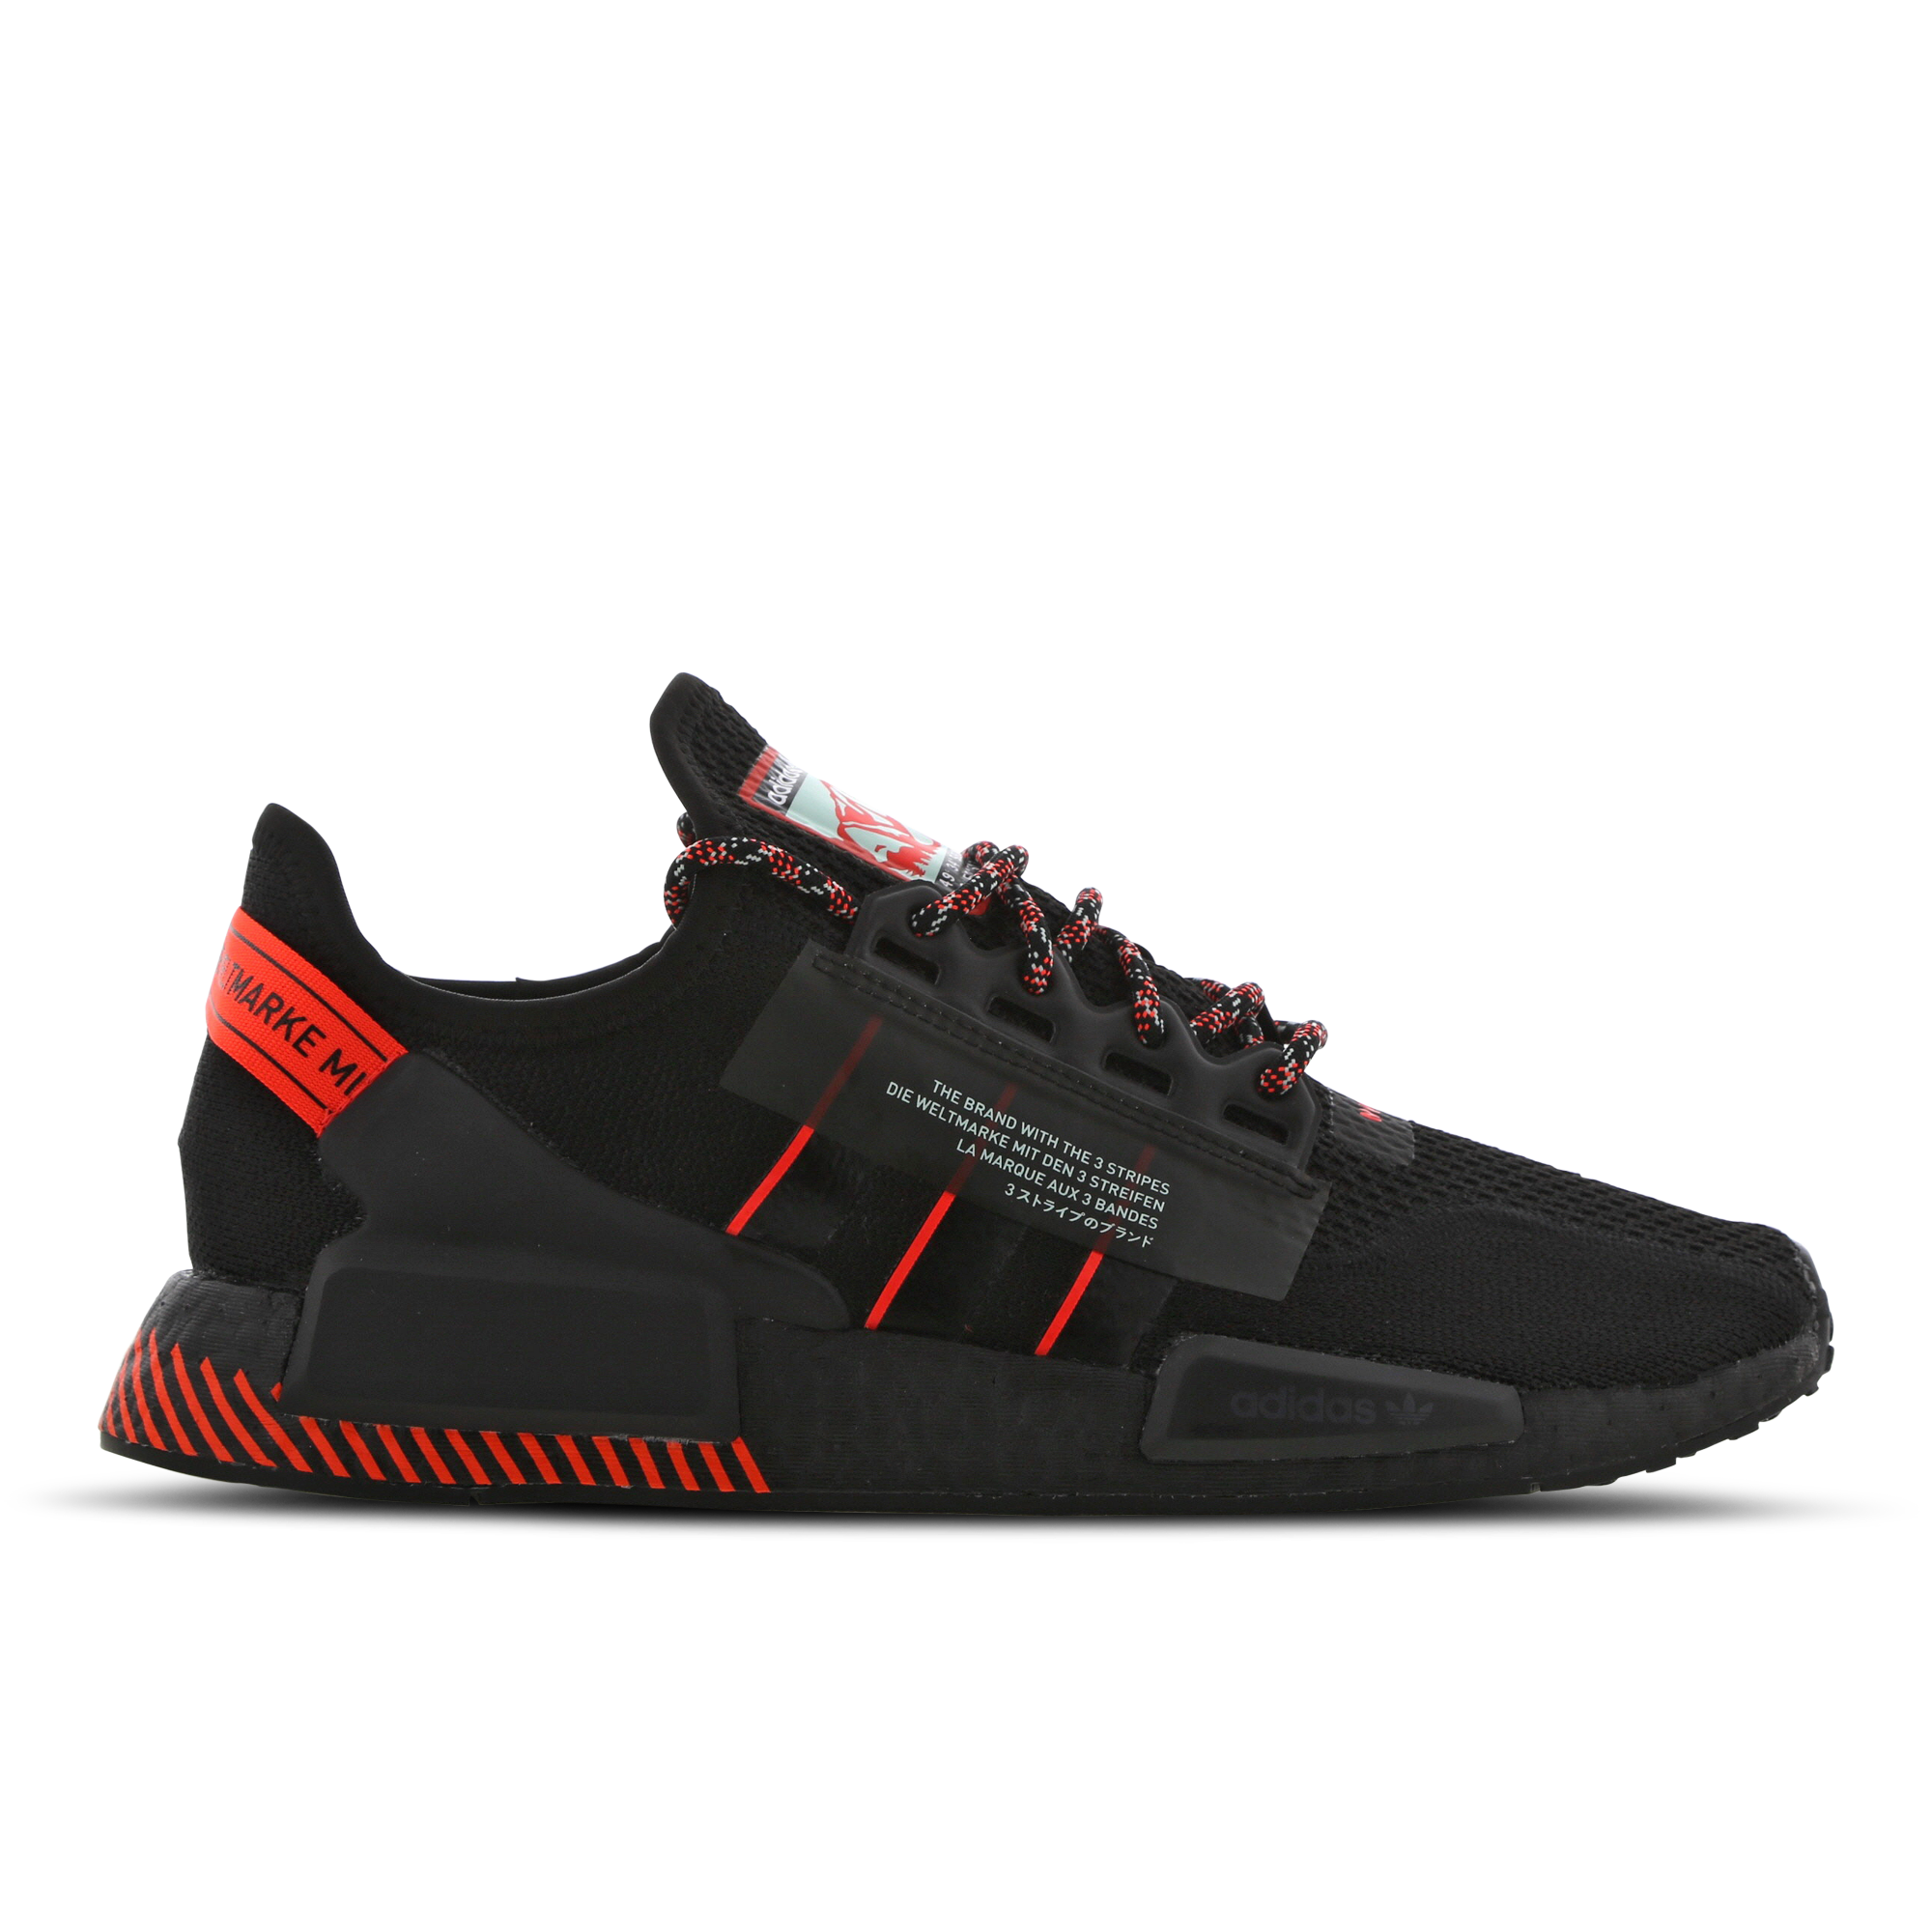 nmd r1 mens red Adidas Outlet Sale Sale Offers sneakers